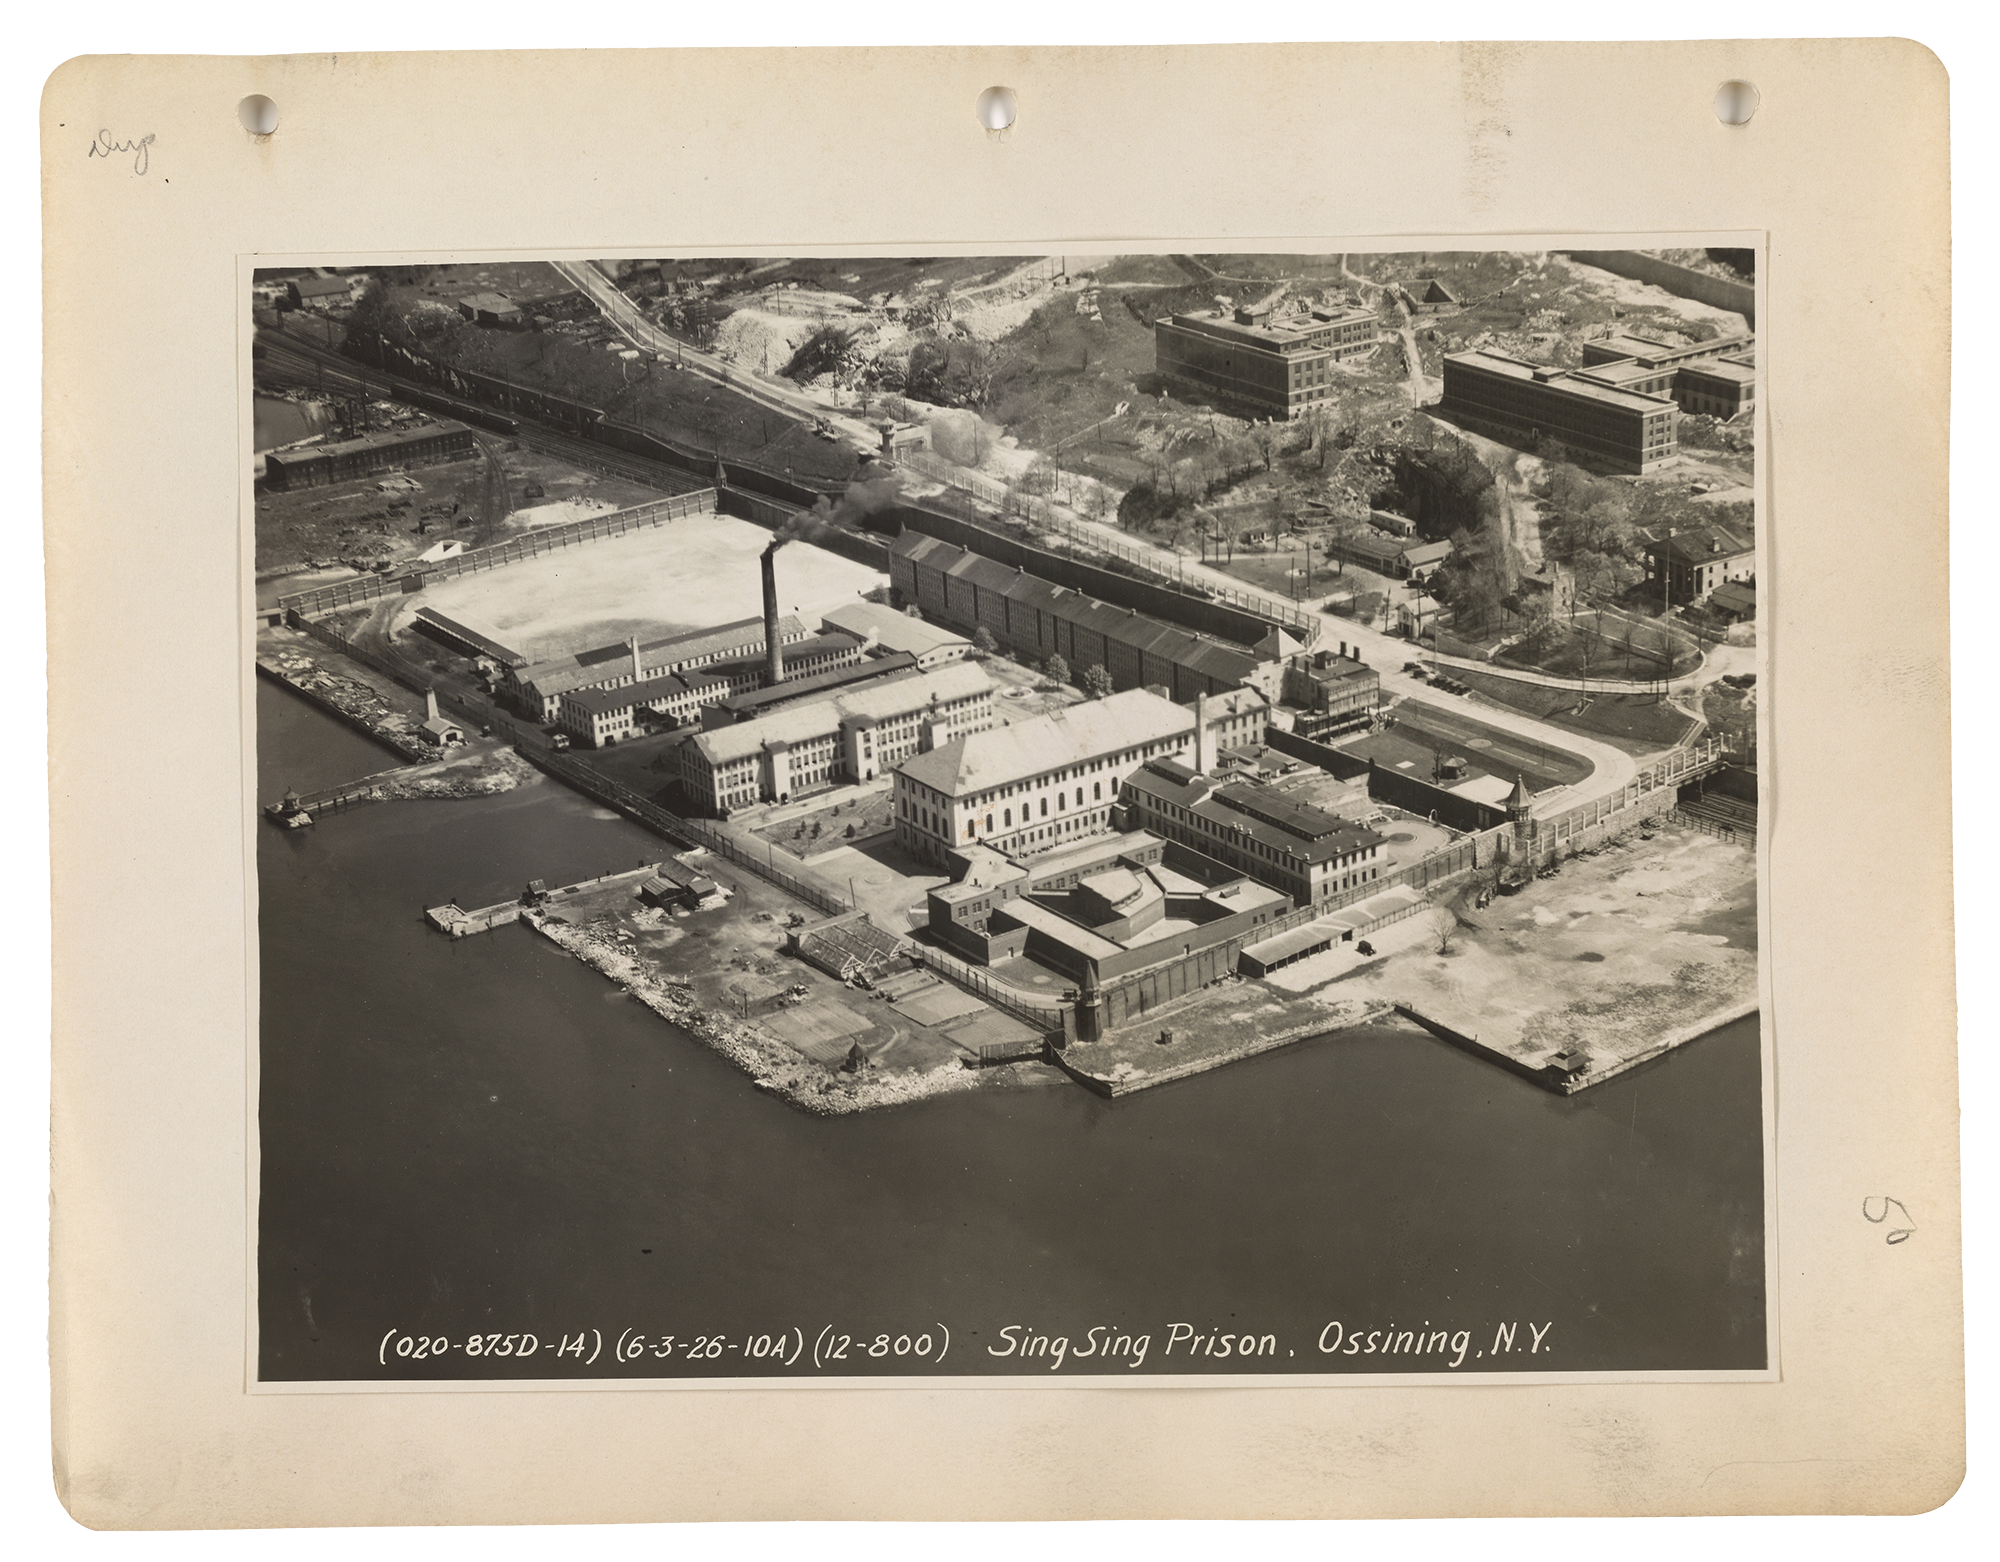 an aerial view of Sing Sing Prison